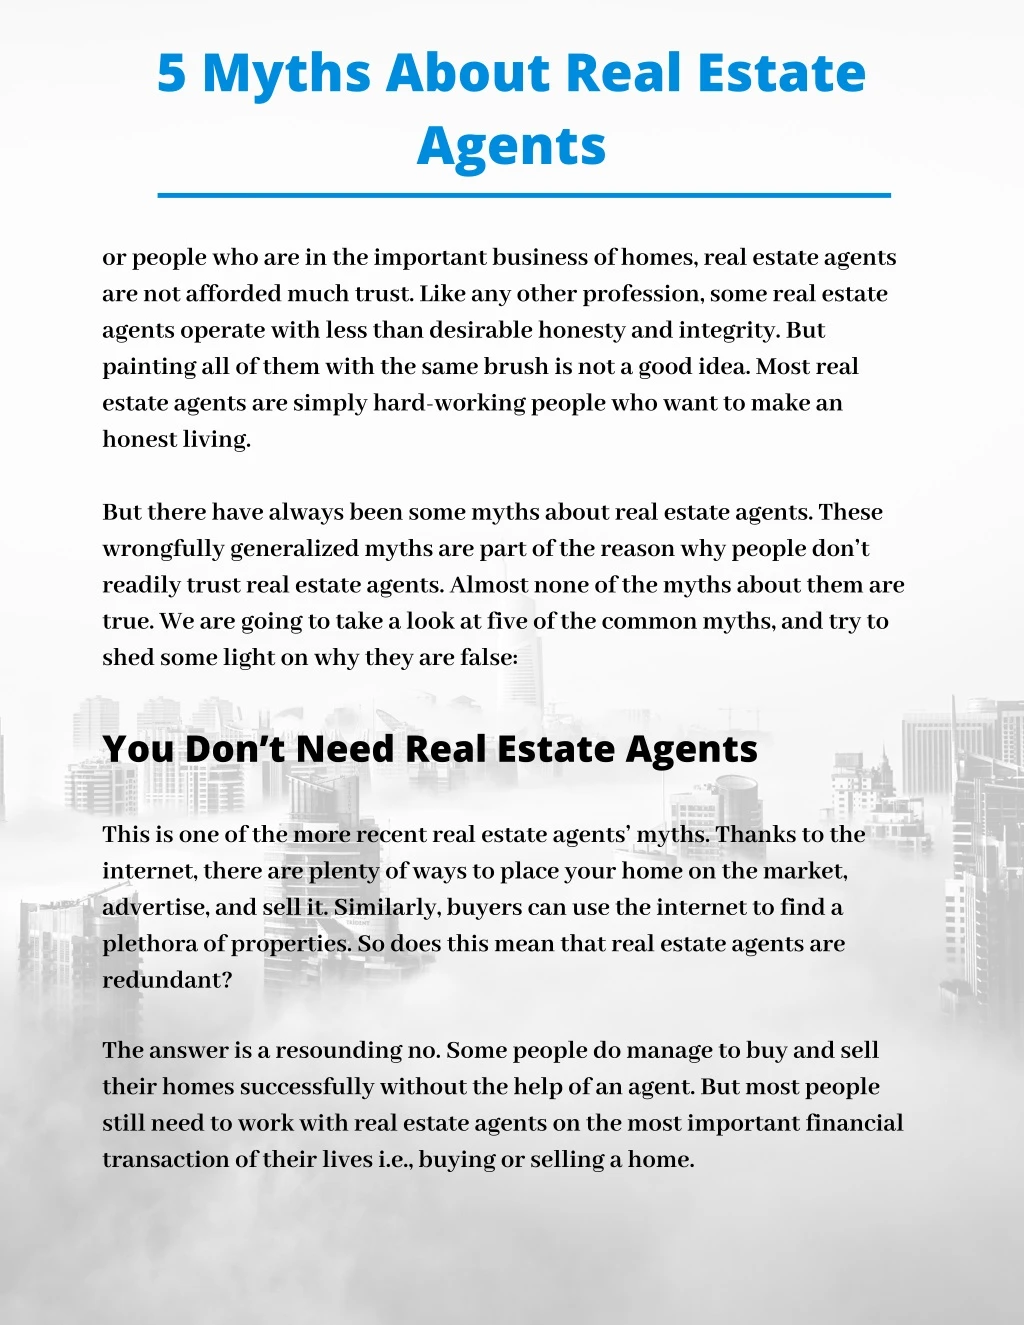 5 myths about real estate agents